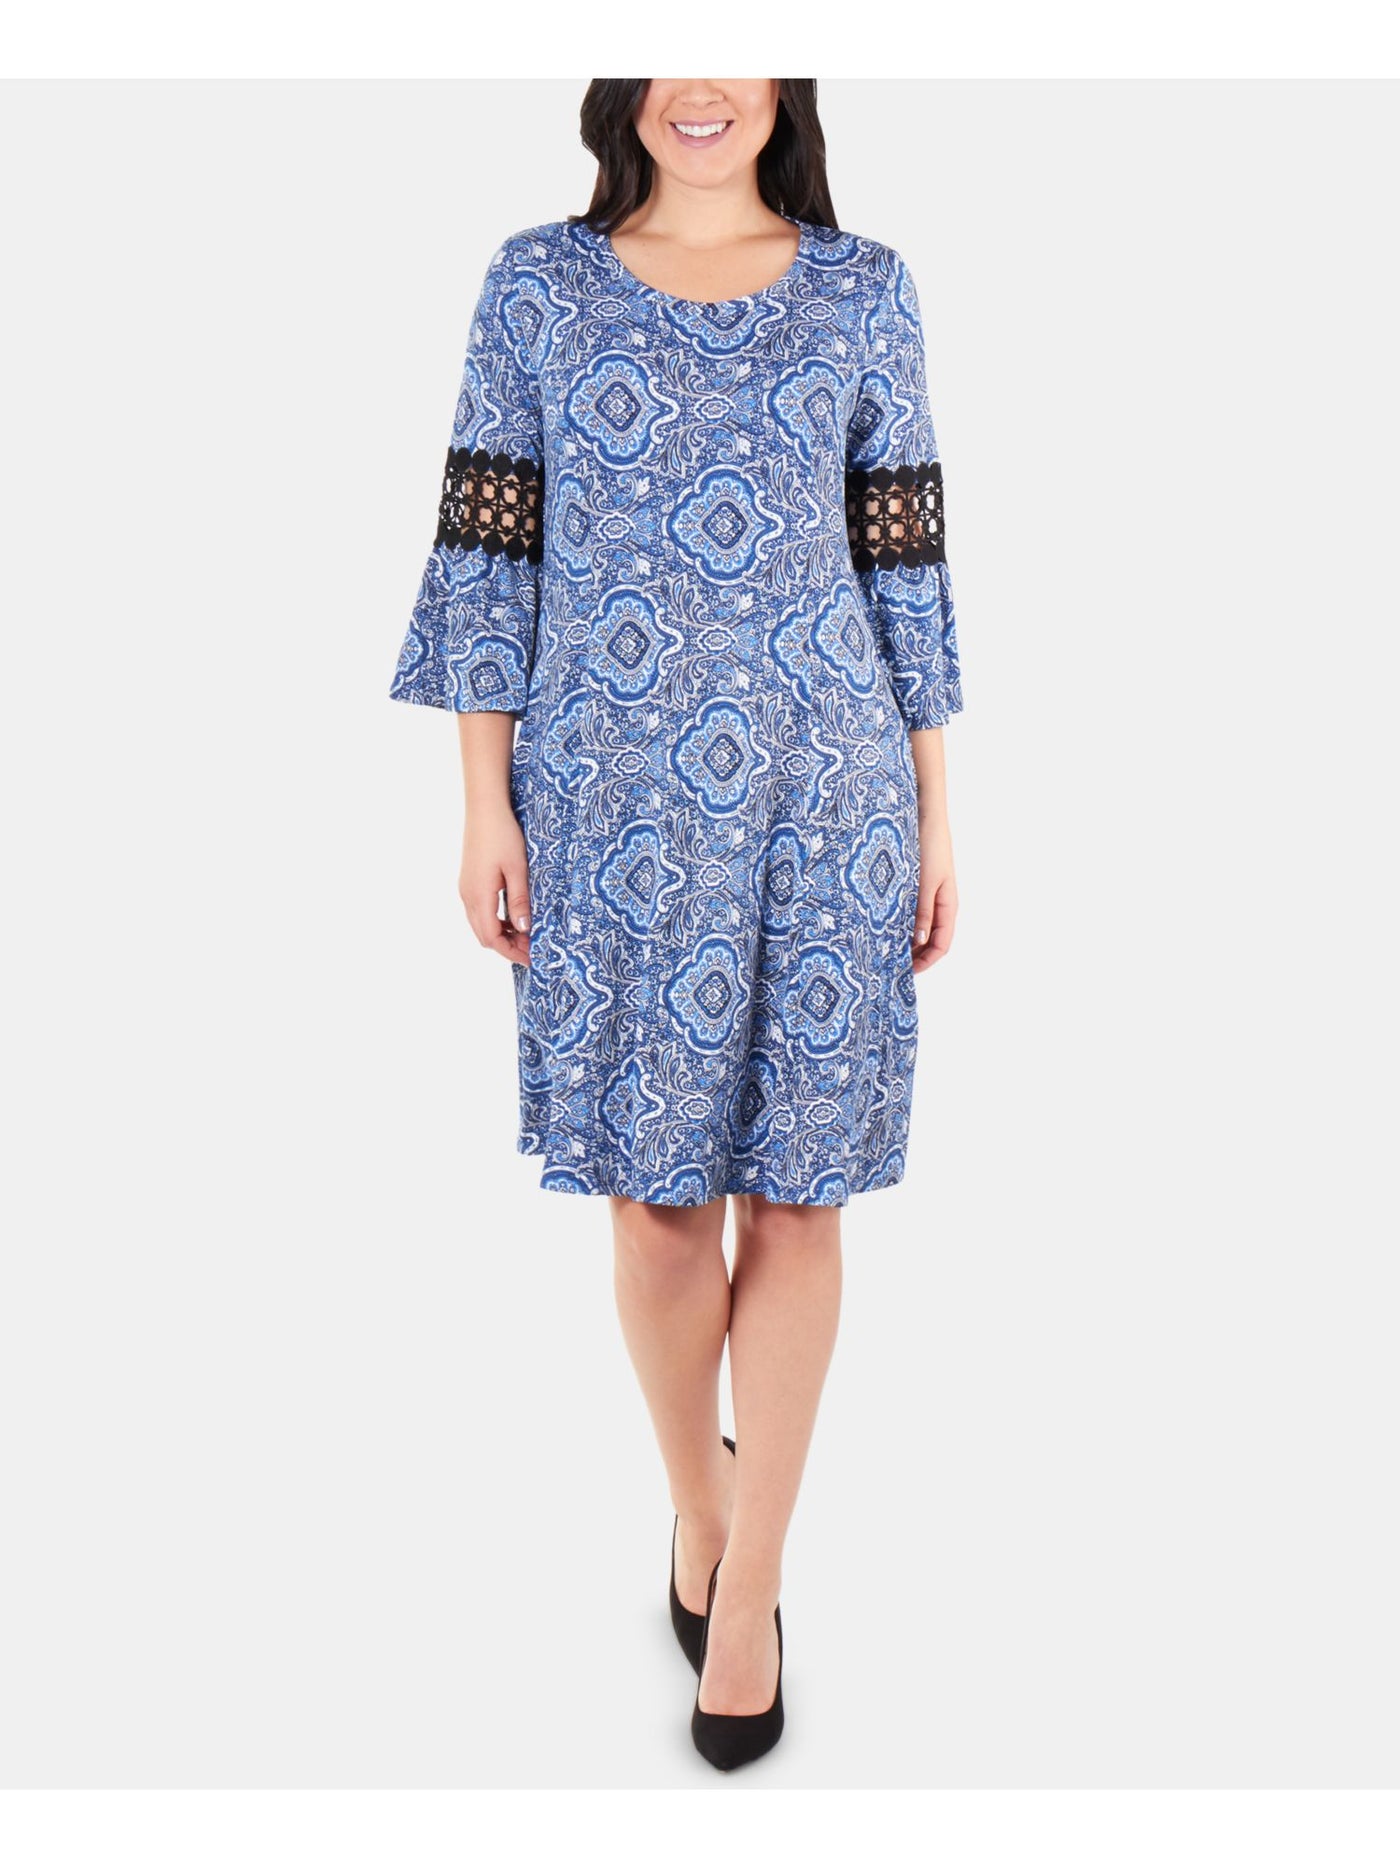 NY COLLECTION Womens Blue Printed Bell Sleeve Jewel Neck Below The Knee Trapeze Dress Petites PXS